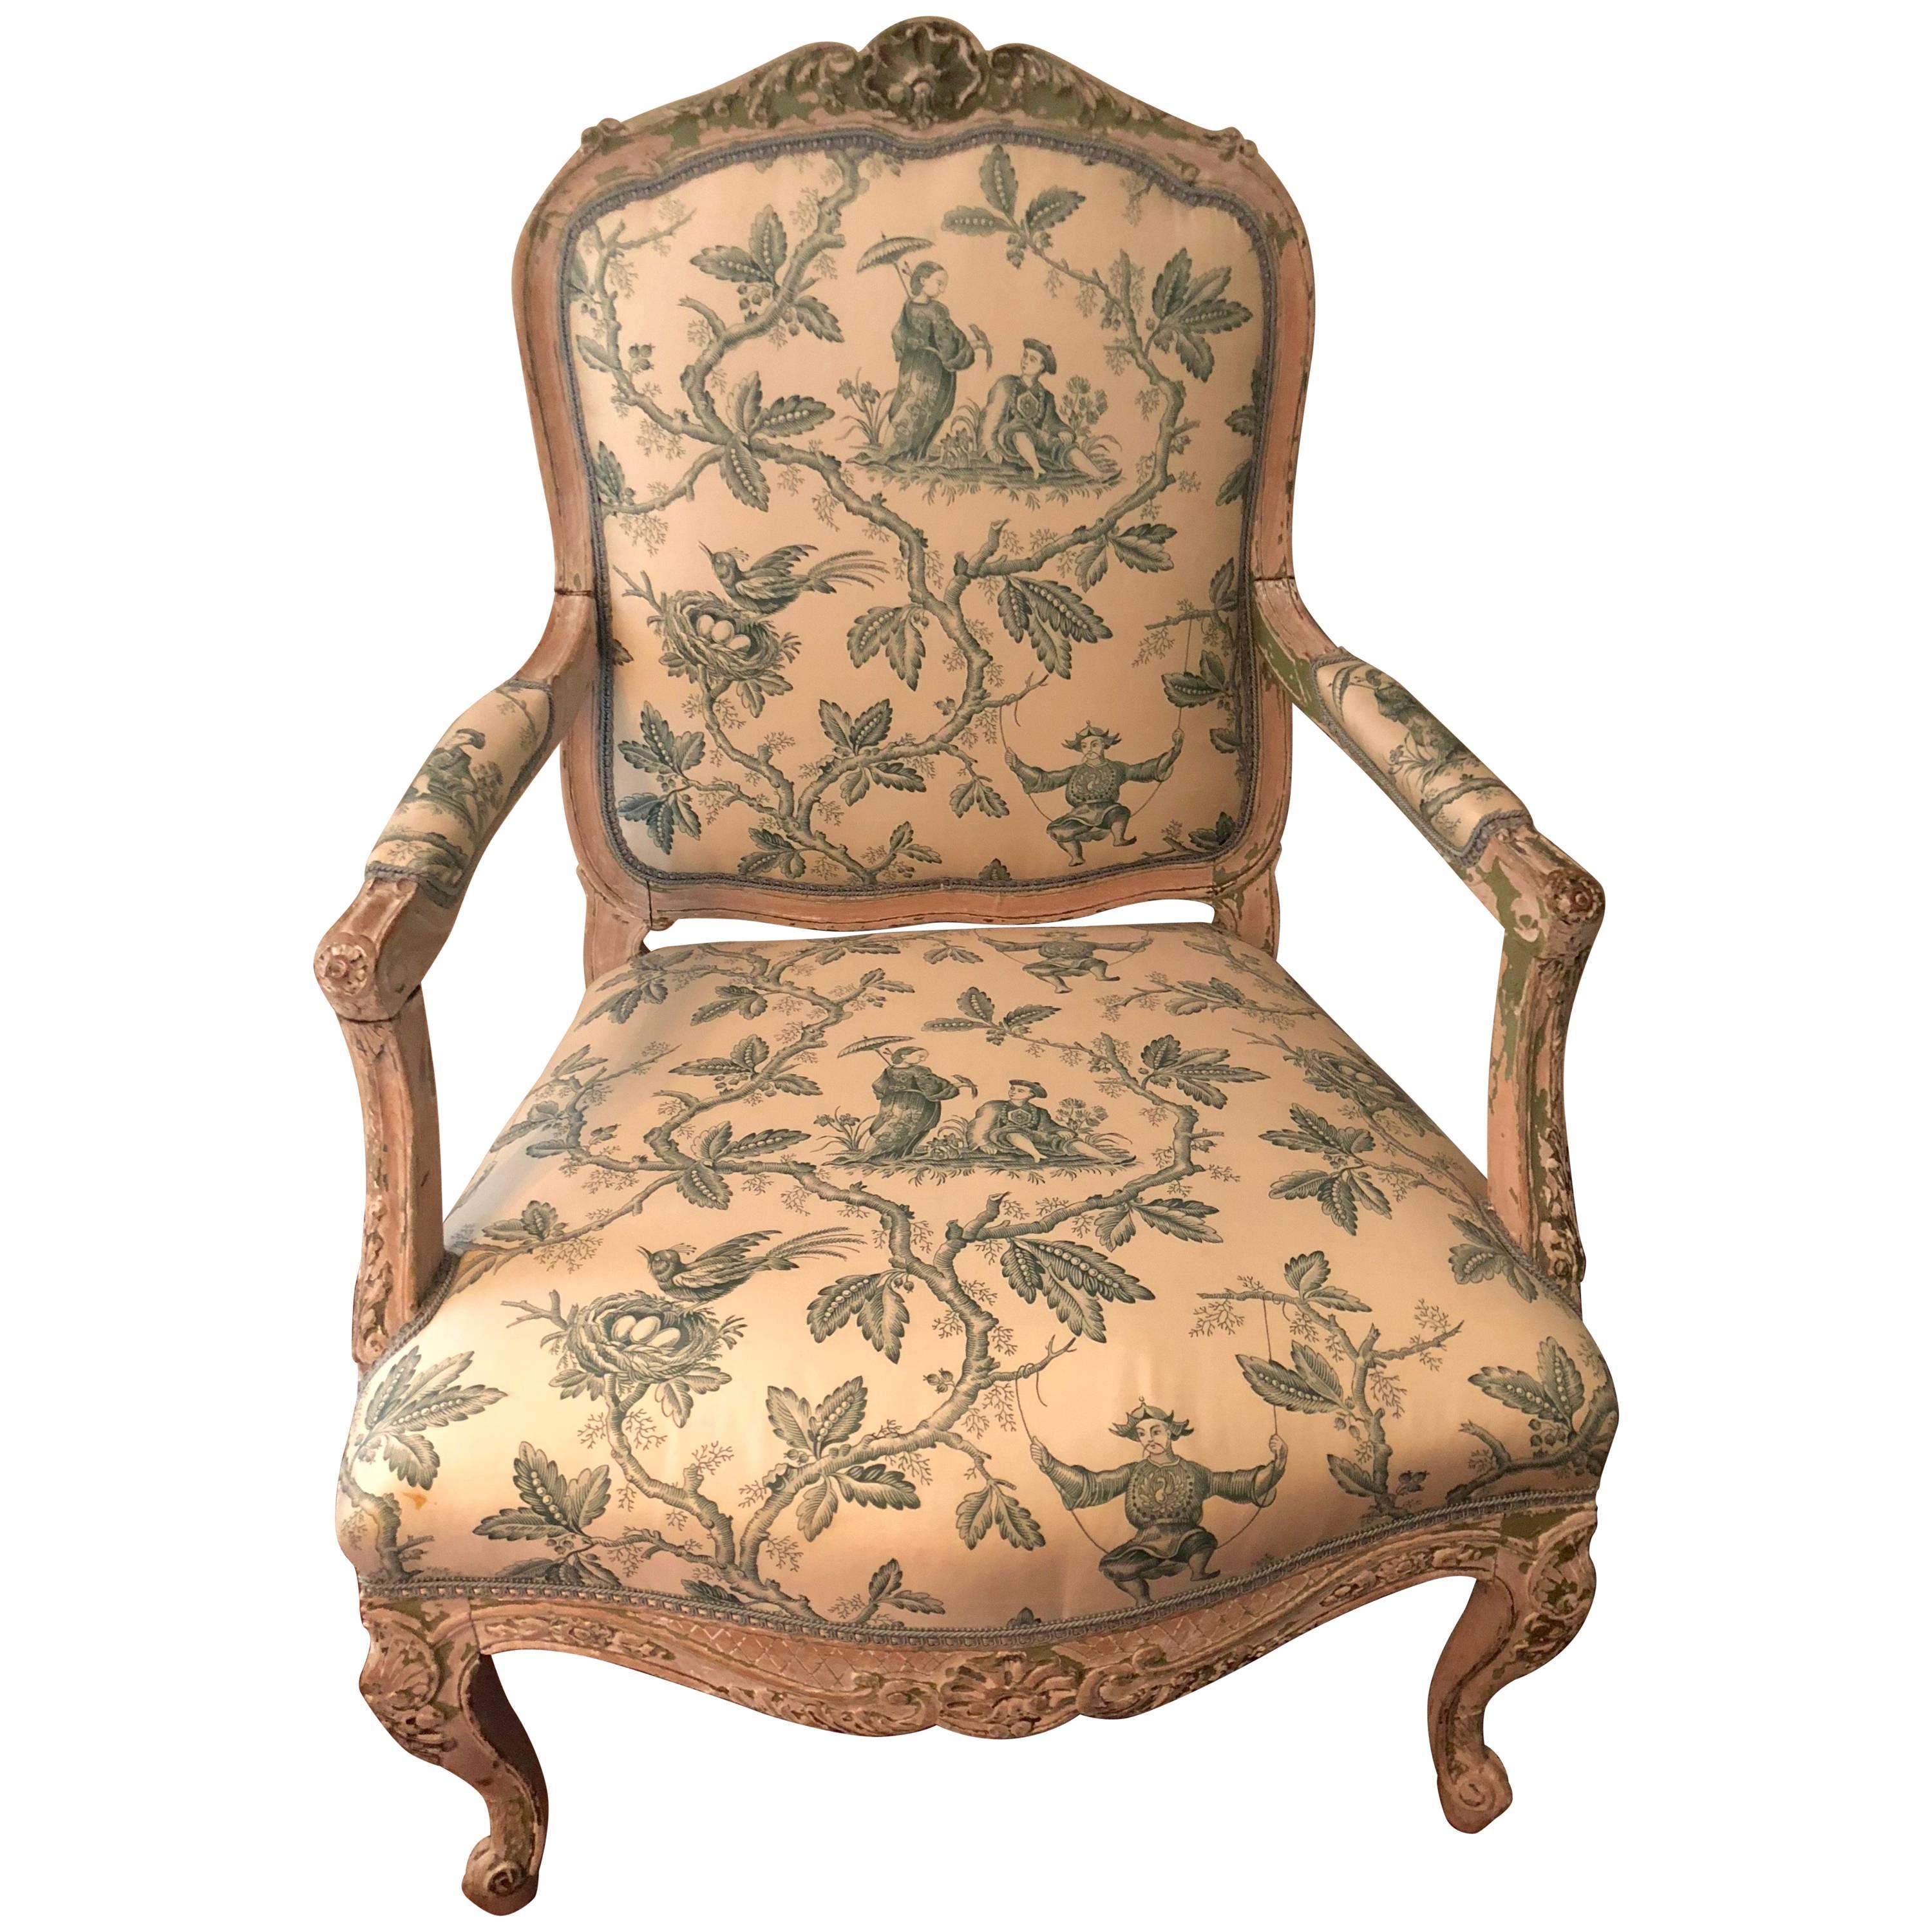 Stately Louis XVI Style Chinoiserie Upholstered Armchair